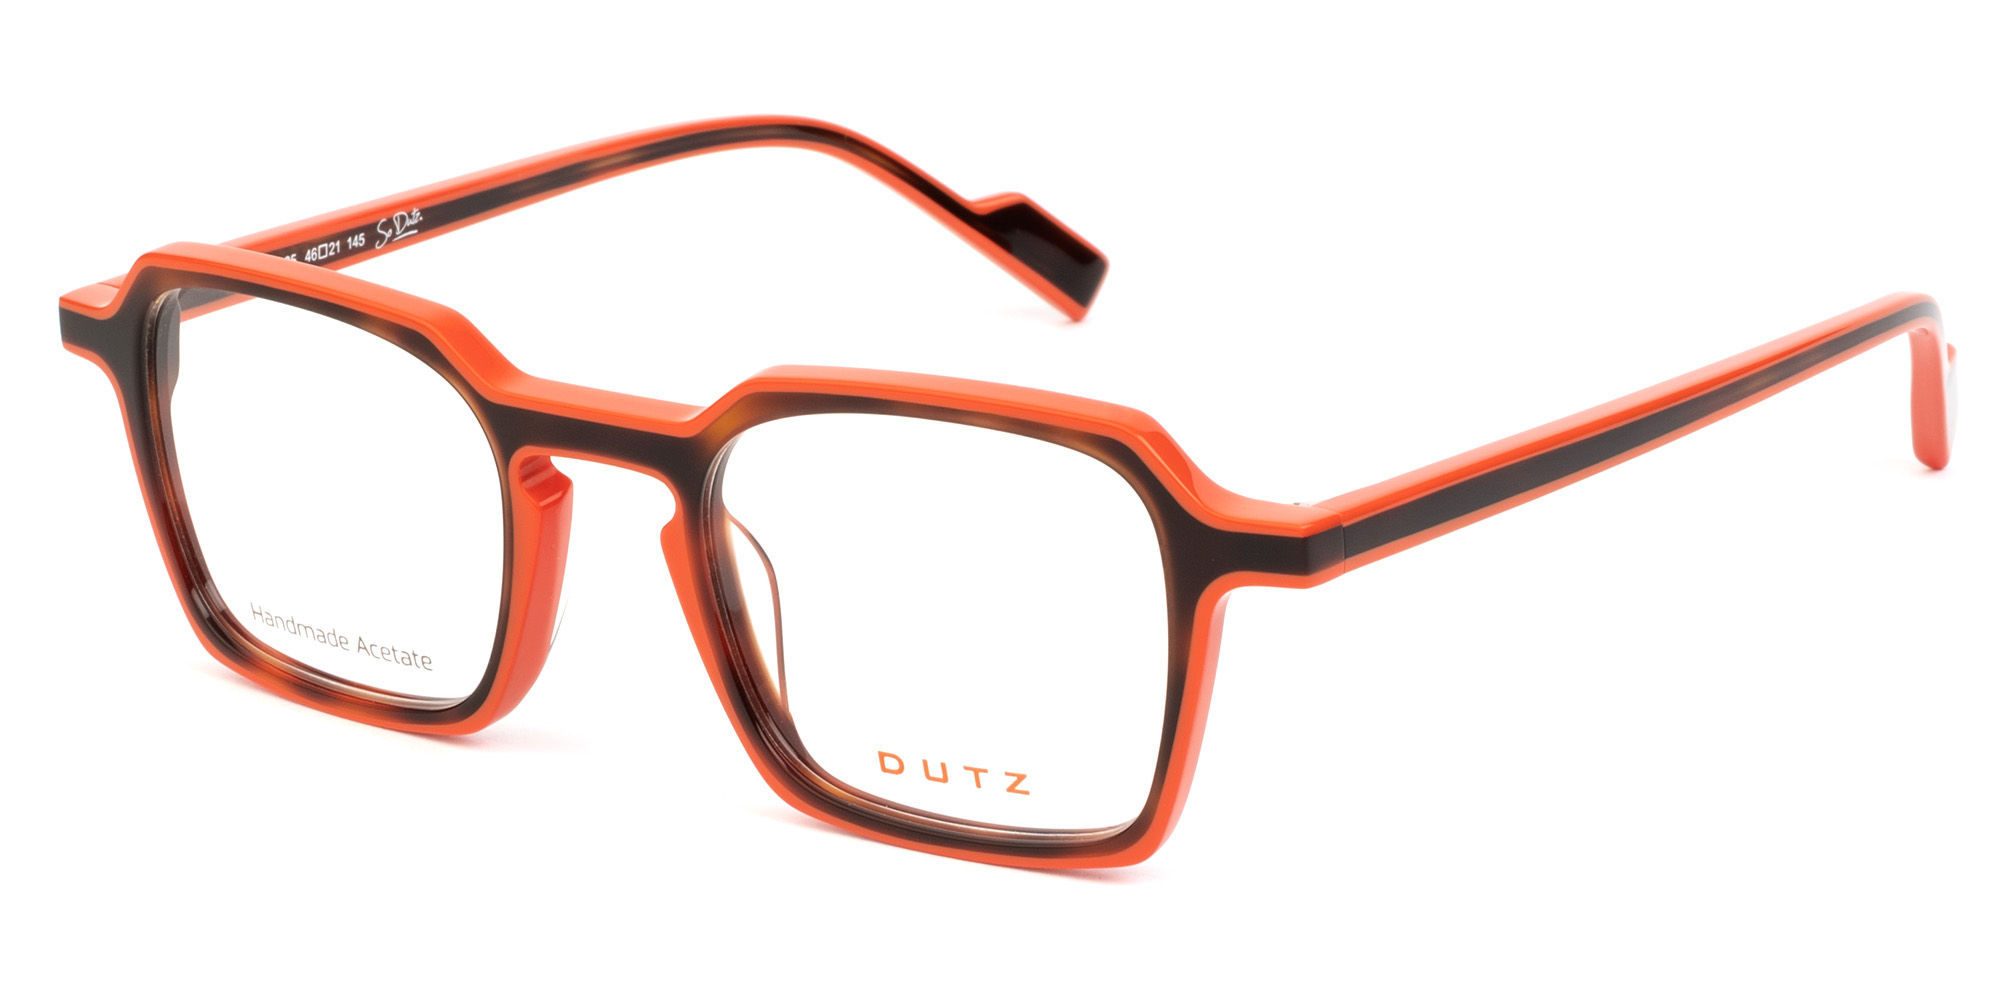 Bi-color, orange combined with brown, acetate frame and matching color temples